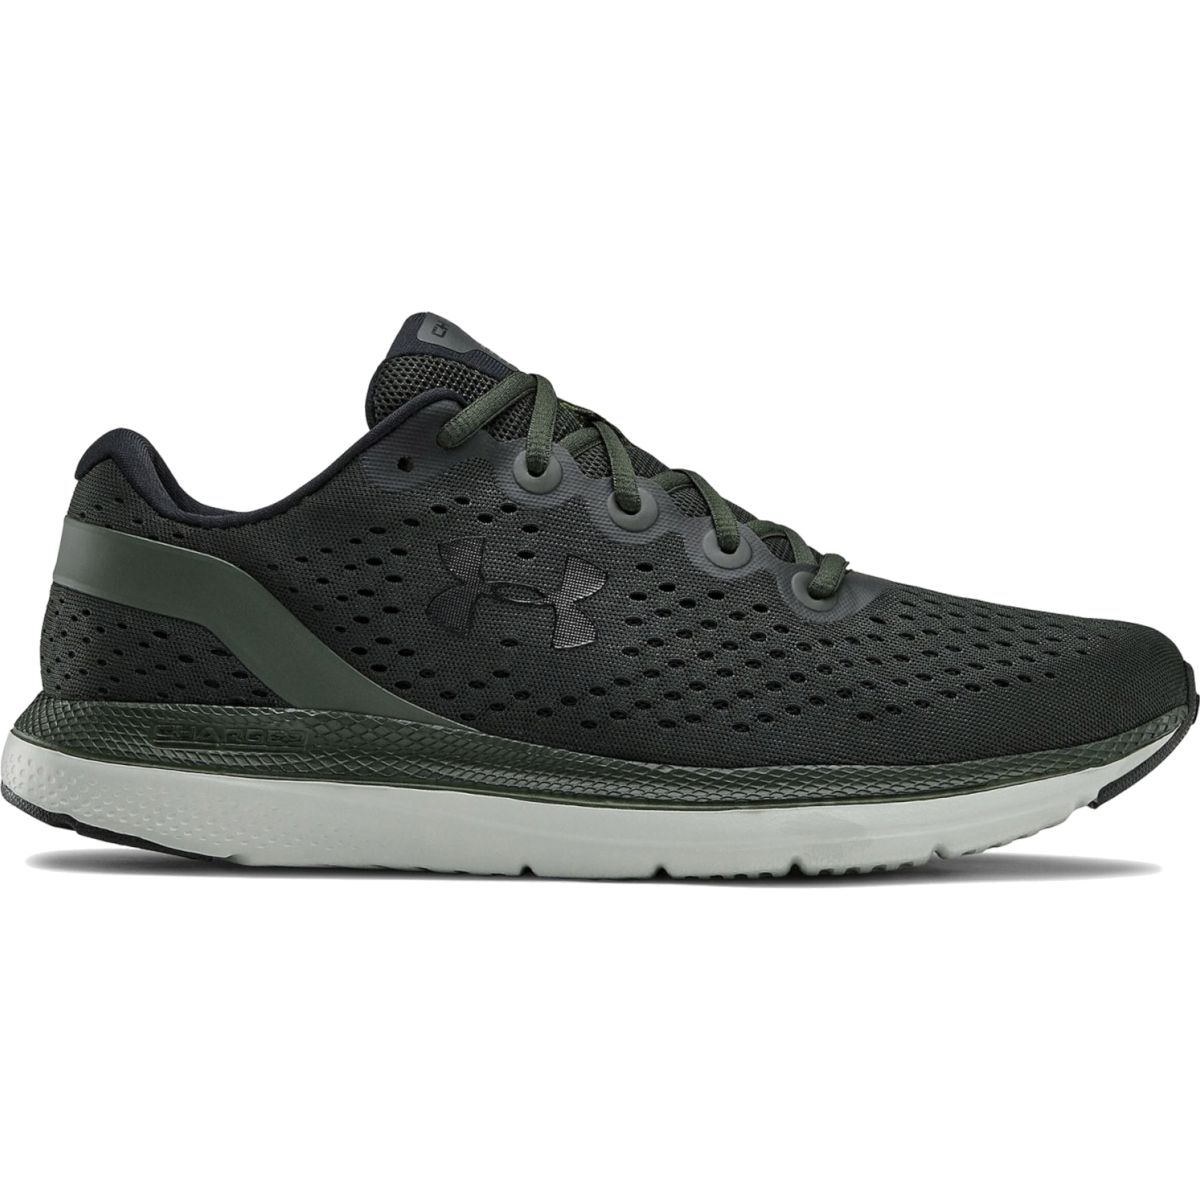 Under Armour Charged Impulse Men's Running Shoes 3021950-300